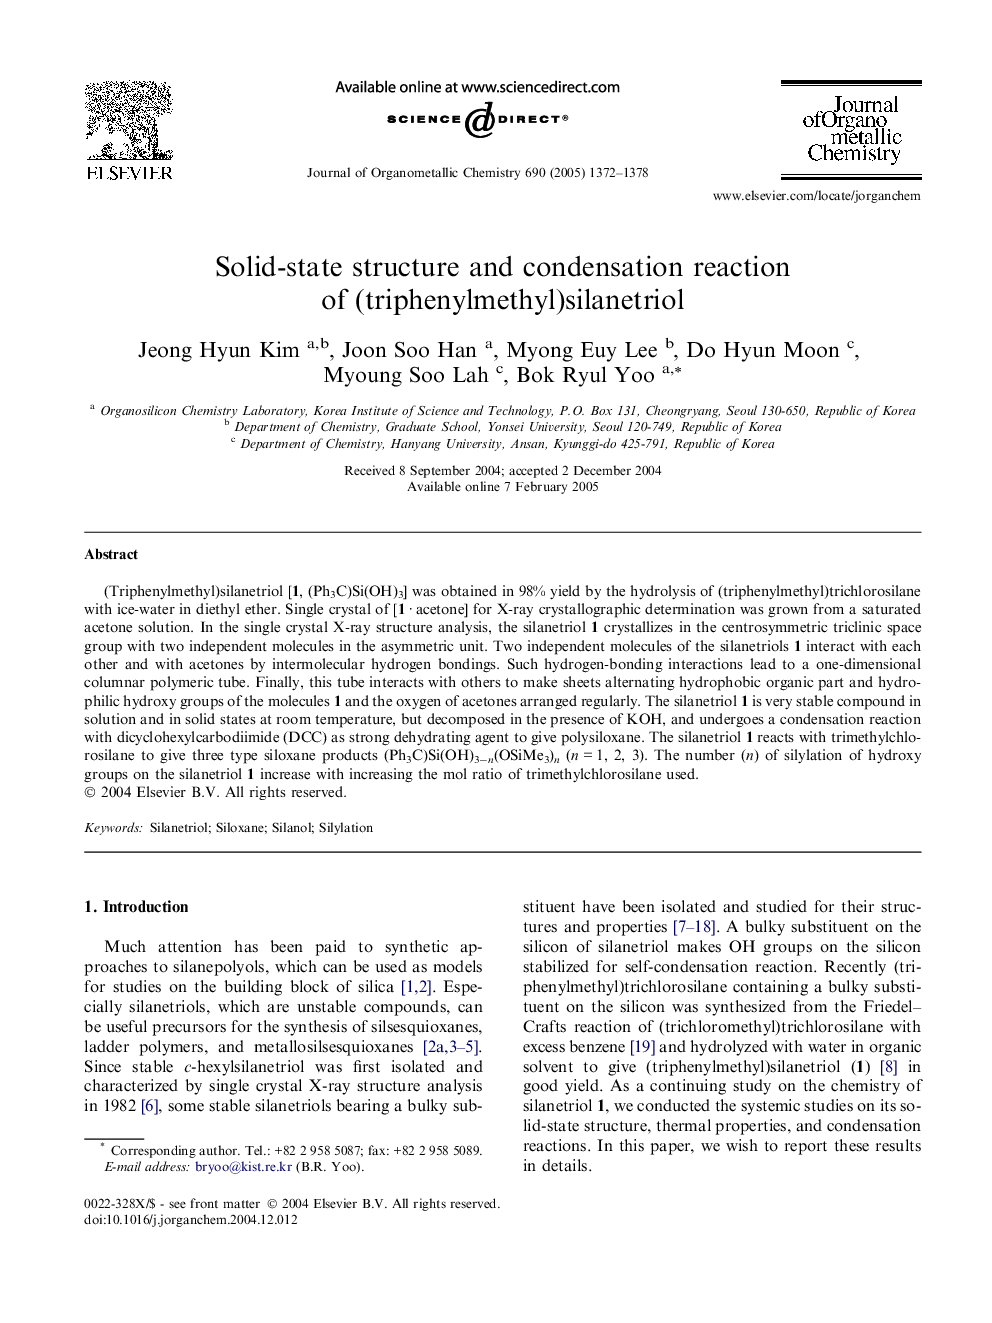 Solid-state structure and condensation reaction of (triphenylmethyl)silanetriol